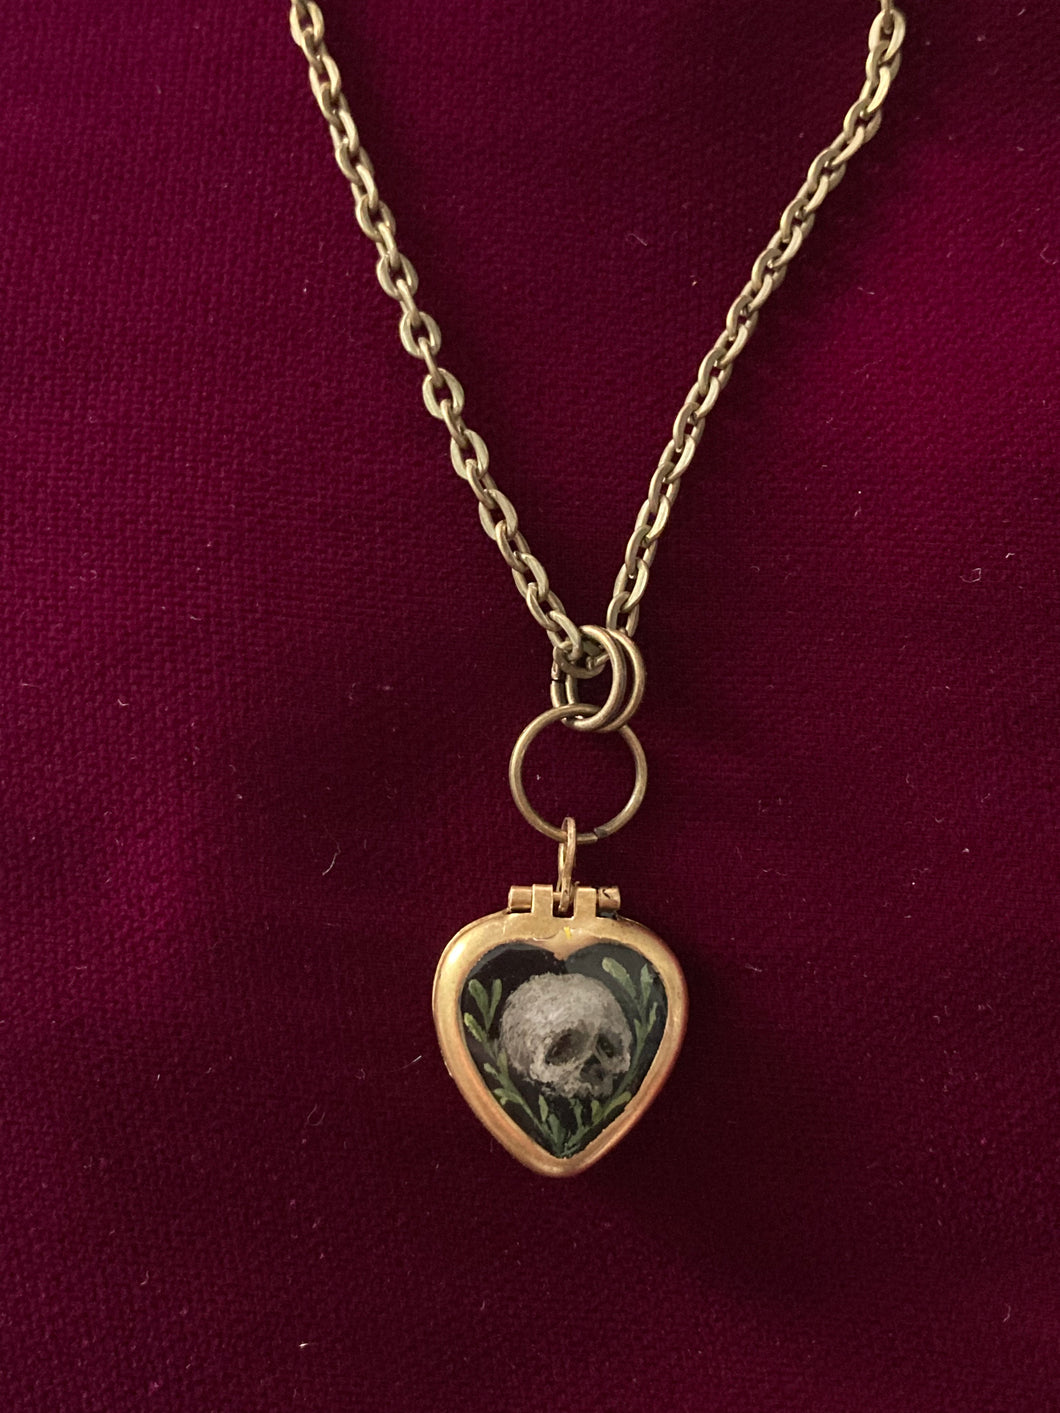 A thumb-nail sized heart-shaped brass pendant. The front is painting is a tiny human skull. One each side of the skull are small branches with leaves. The background is black.